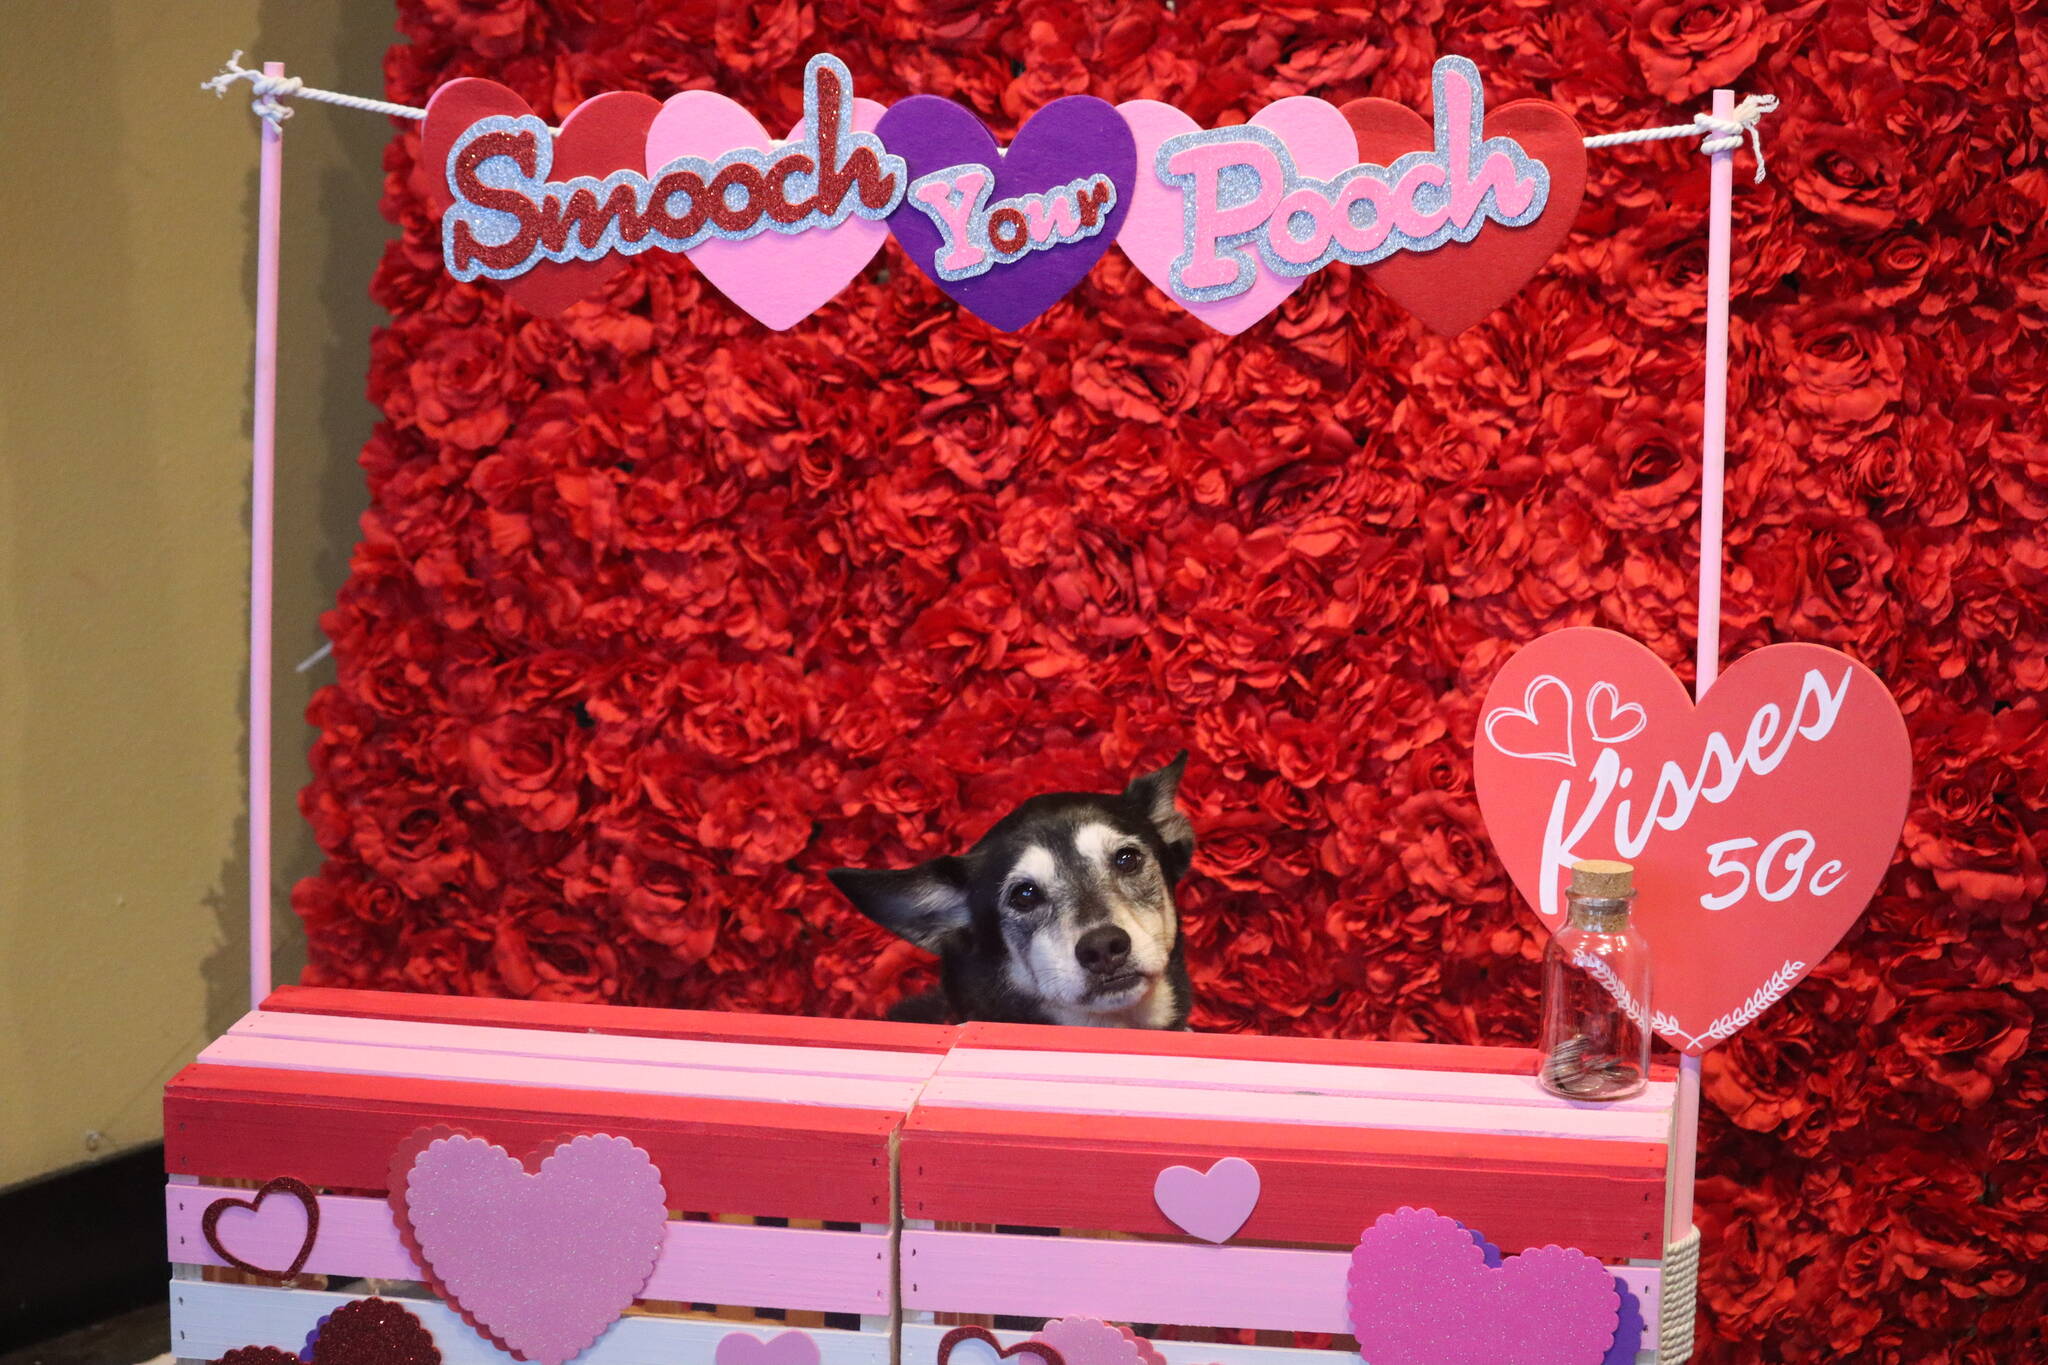 Hailey Stockton helps her dog Marlie pose for a photo behind the kissing booth at McGivney’s Downtown as part of Pawlentine’s Day on Saturday, hosted by Juneau’s Downtown Business Association. (Jonson Kuhn / Juneau Empire)